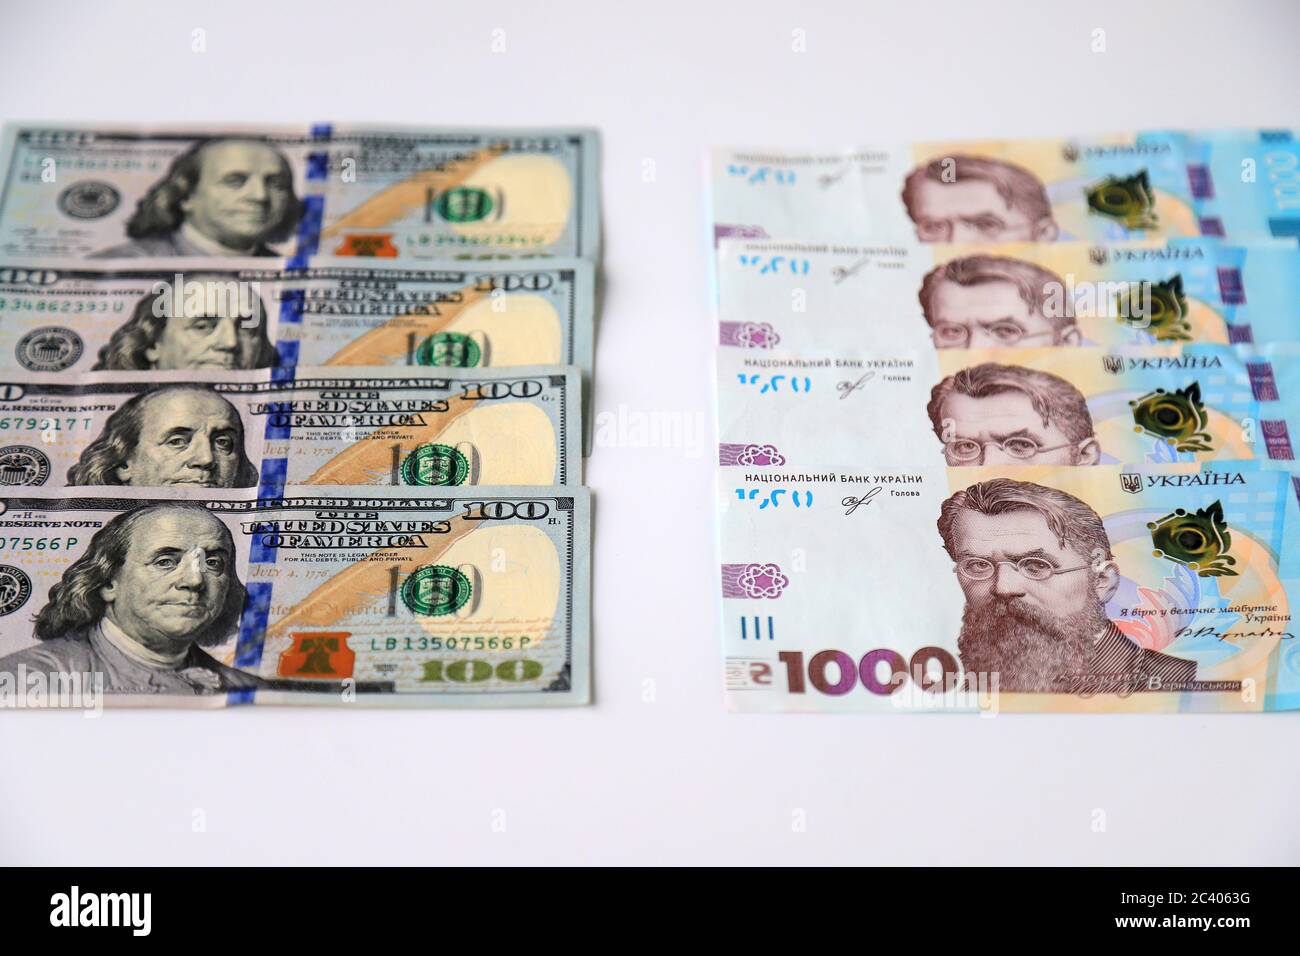 Ukrainian hryvnia, new banknotes of 1000 hryvnias and American 100 dollar bills, close-up. Money background, concept of gifts, shopping, Ukraine, USA Stock Photo